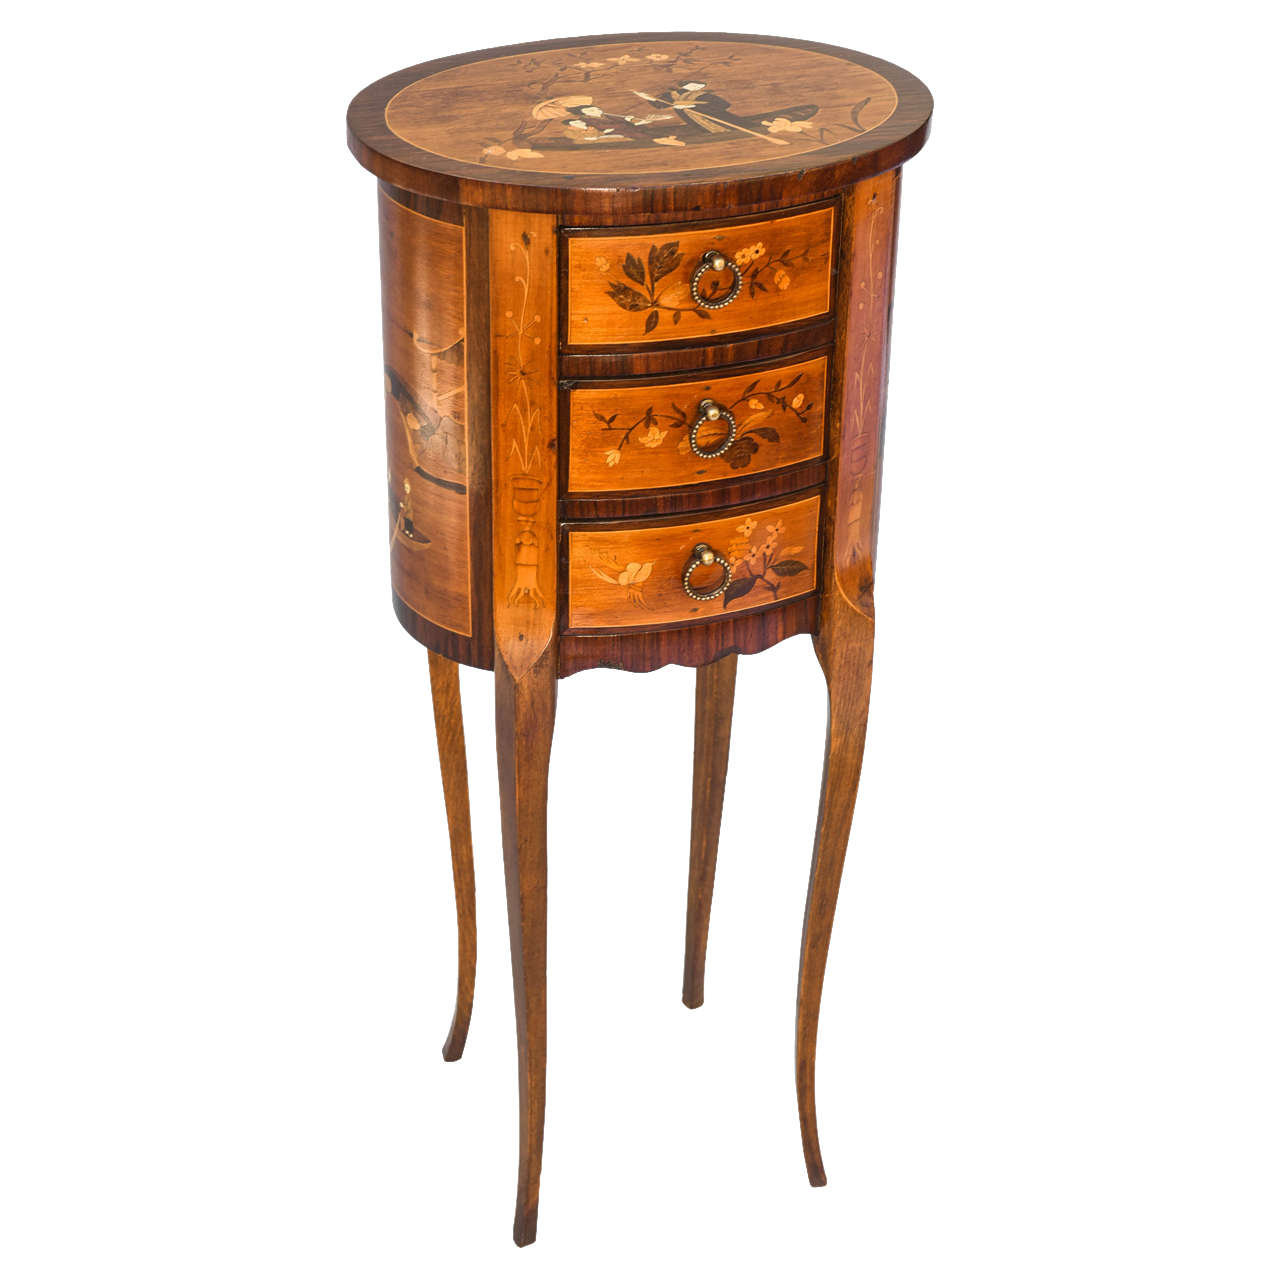 Petite Marquetry French Side Table